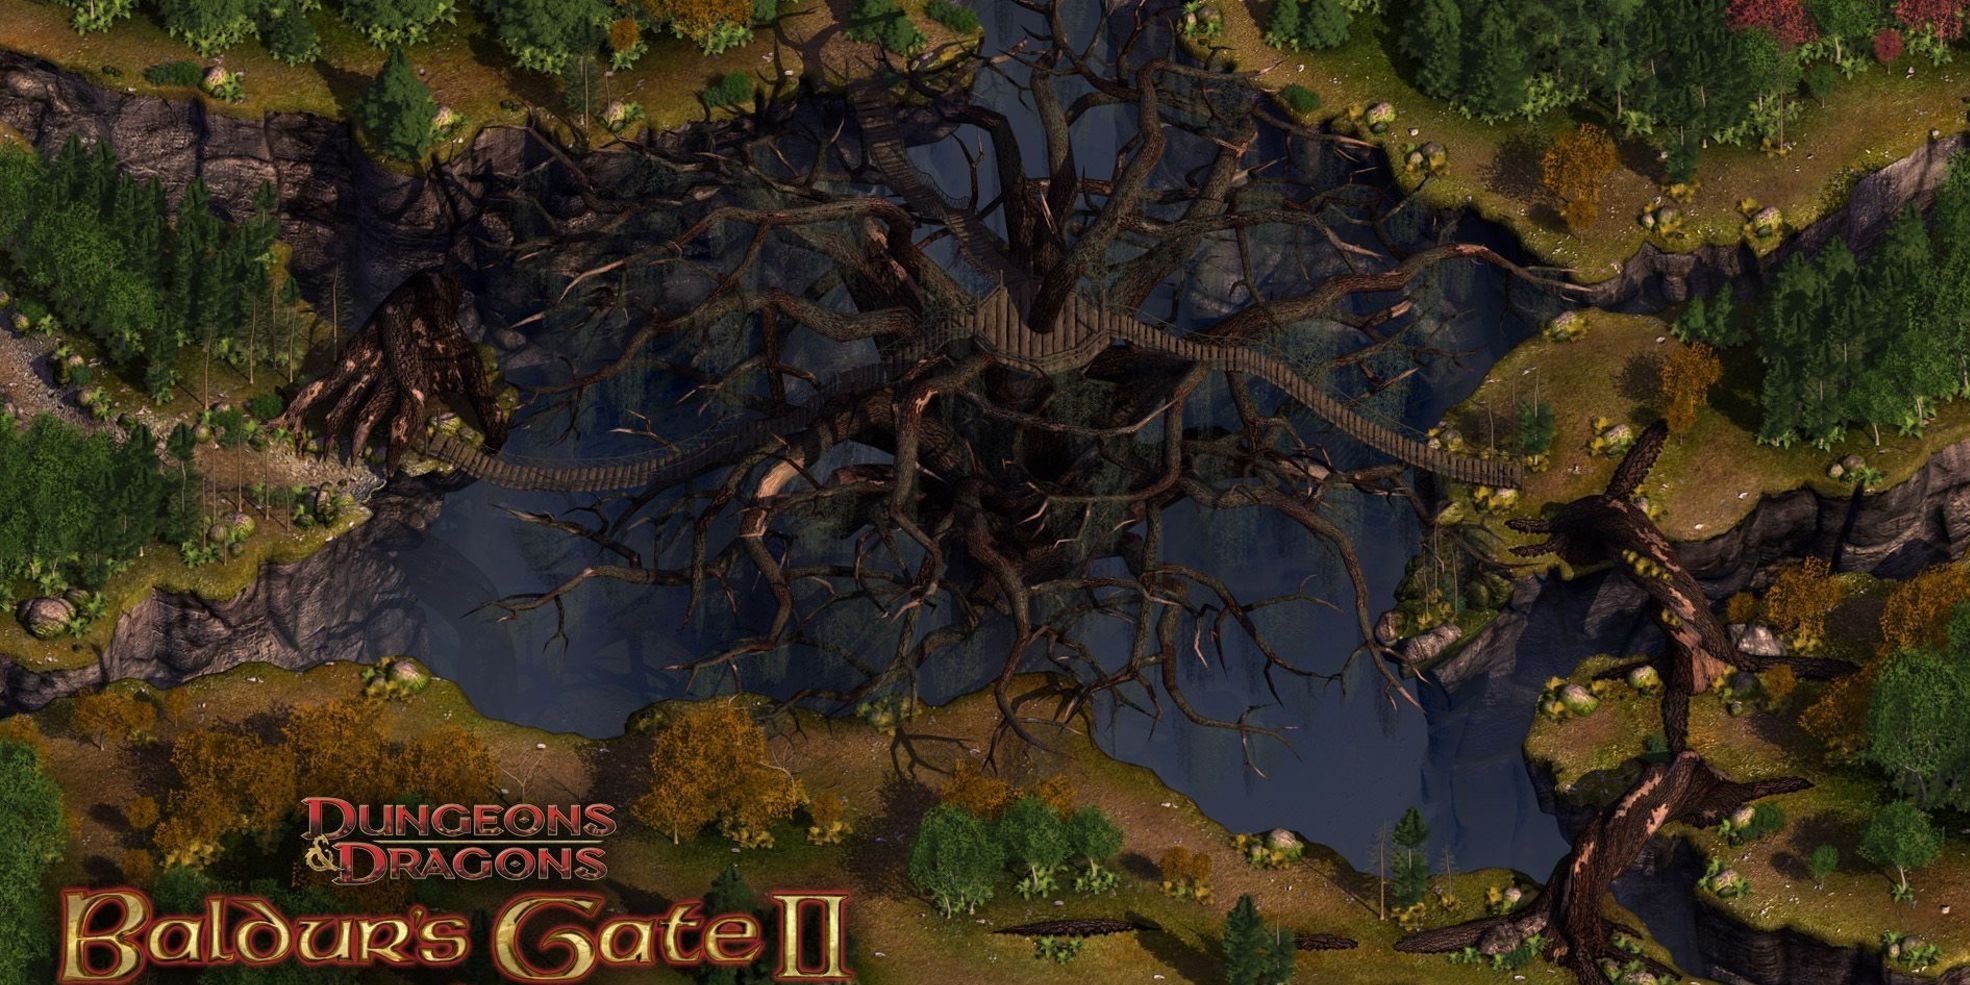 poster for Baldurs Gate II featuring a giant tree connected to different landmasses